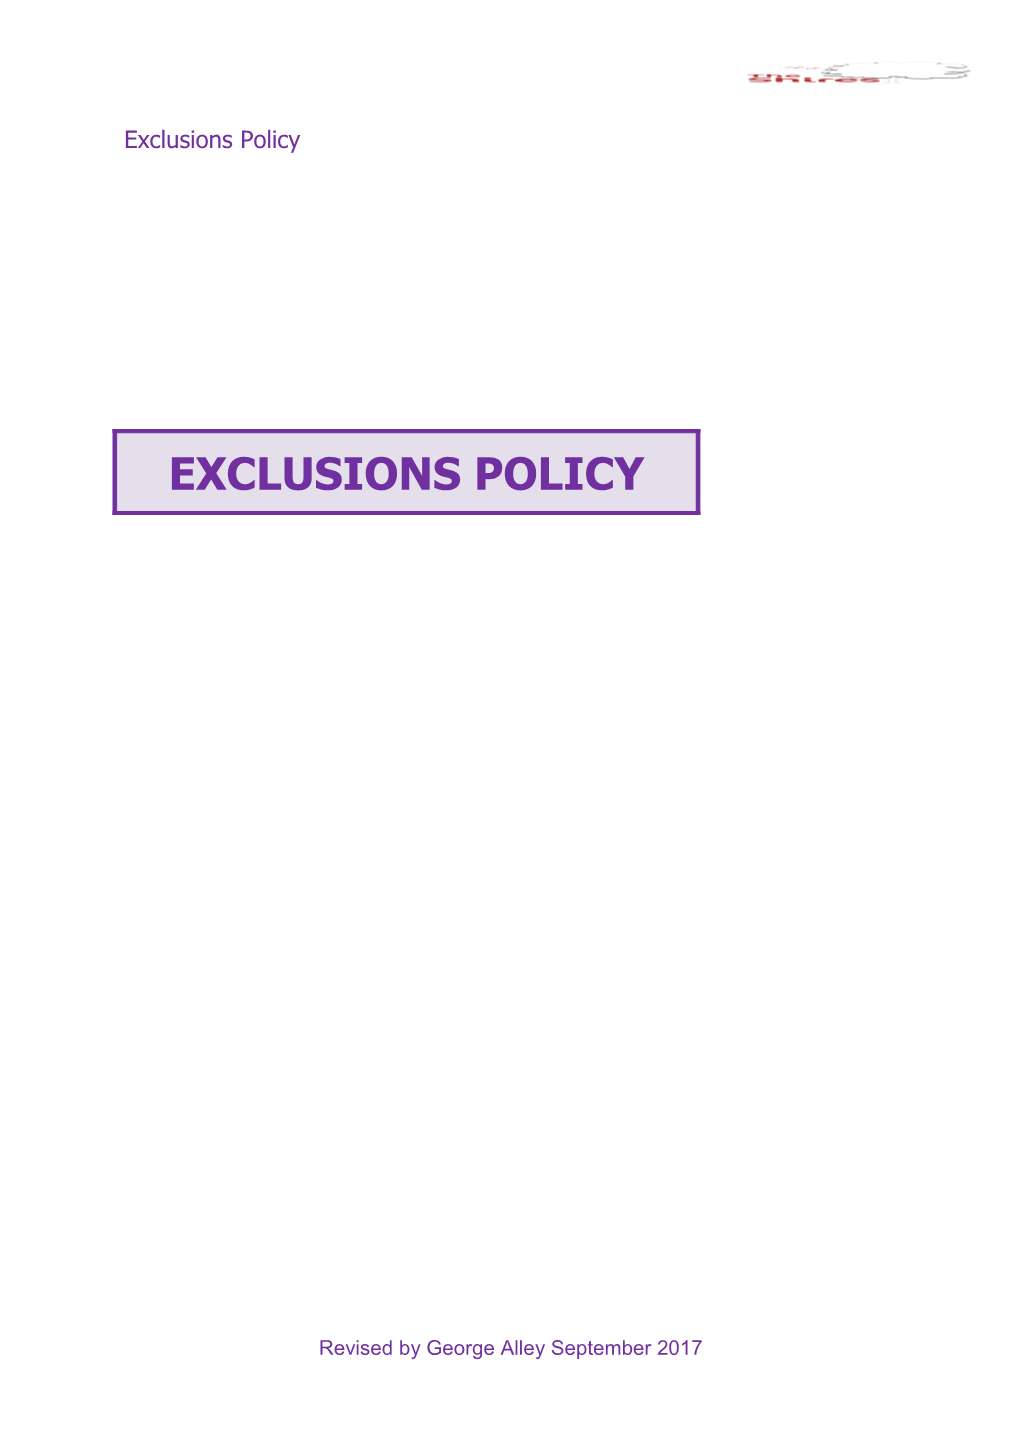 The DCSF Guidance on Exclusions Does Not Apply to Independent Schools